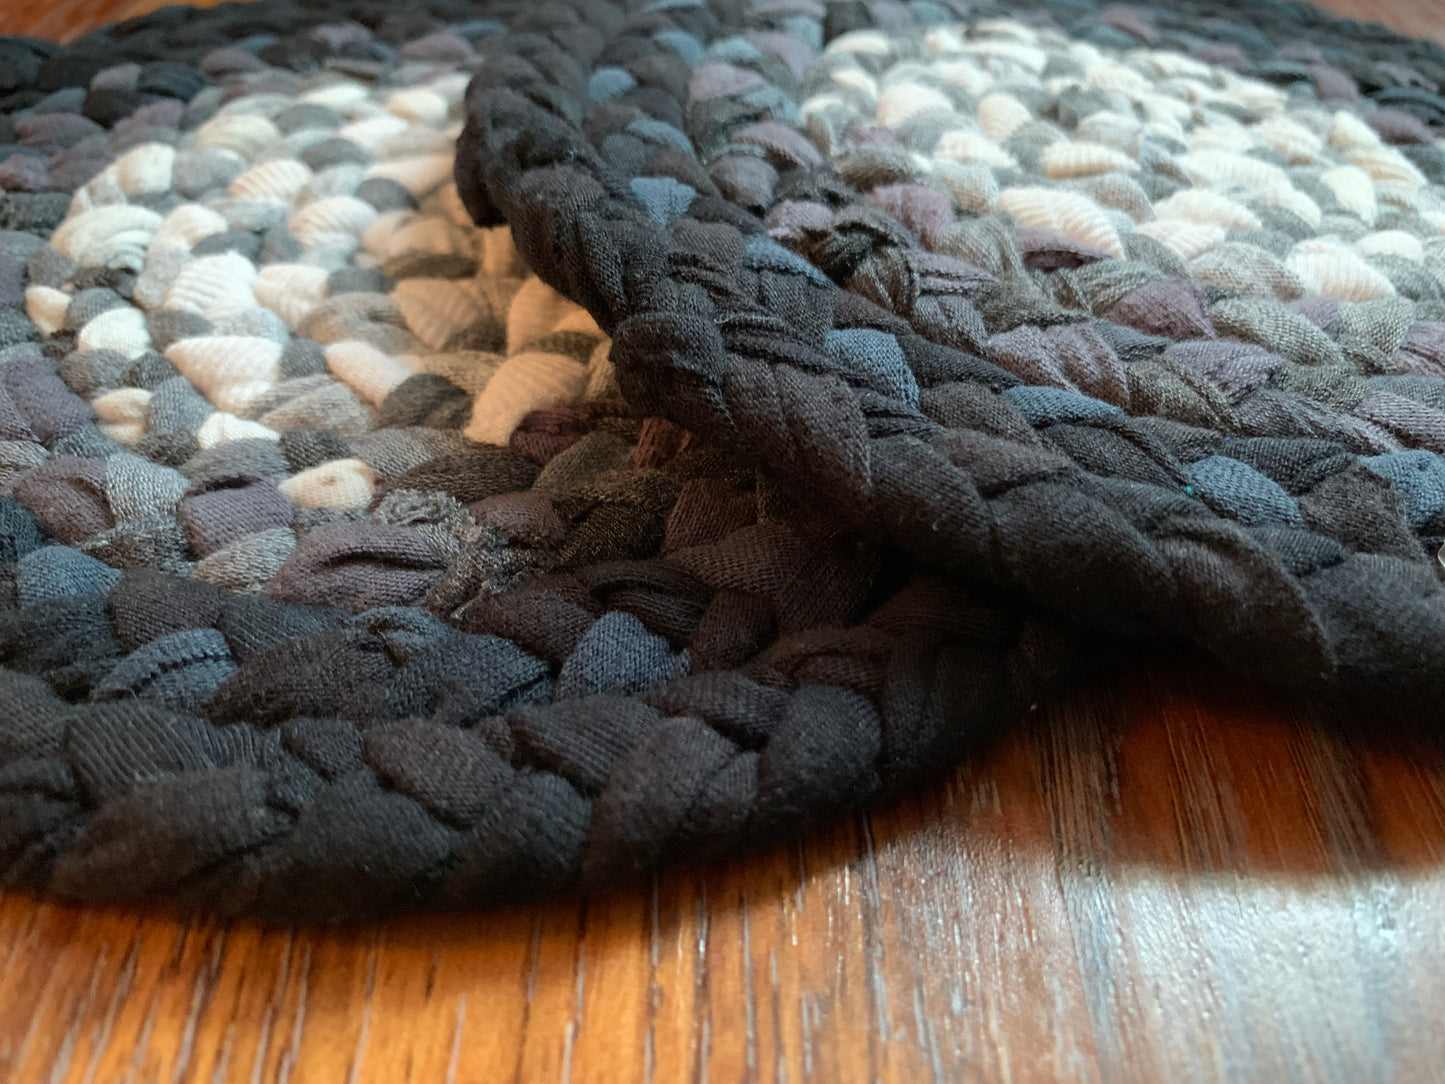 Side view of two trivet potholders, lay flat on a wood surface.